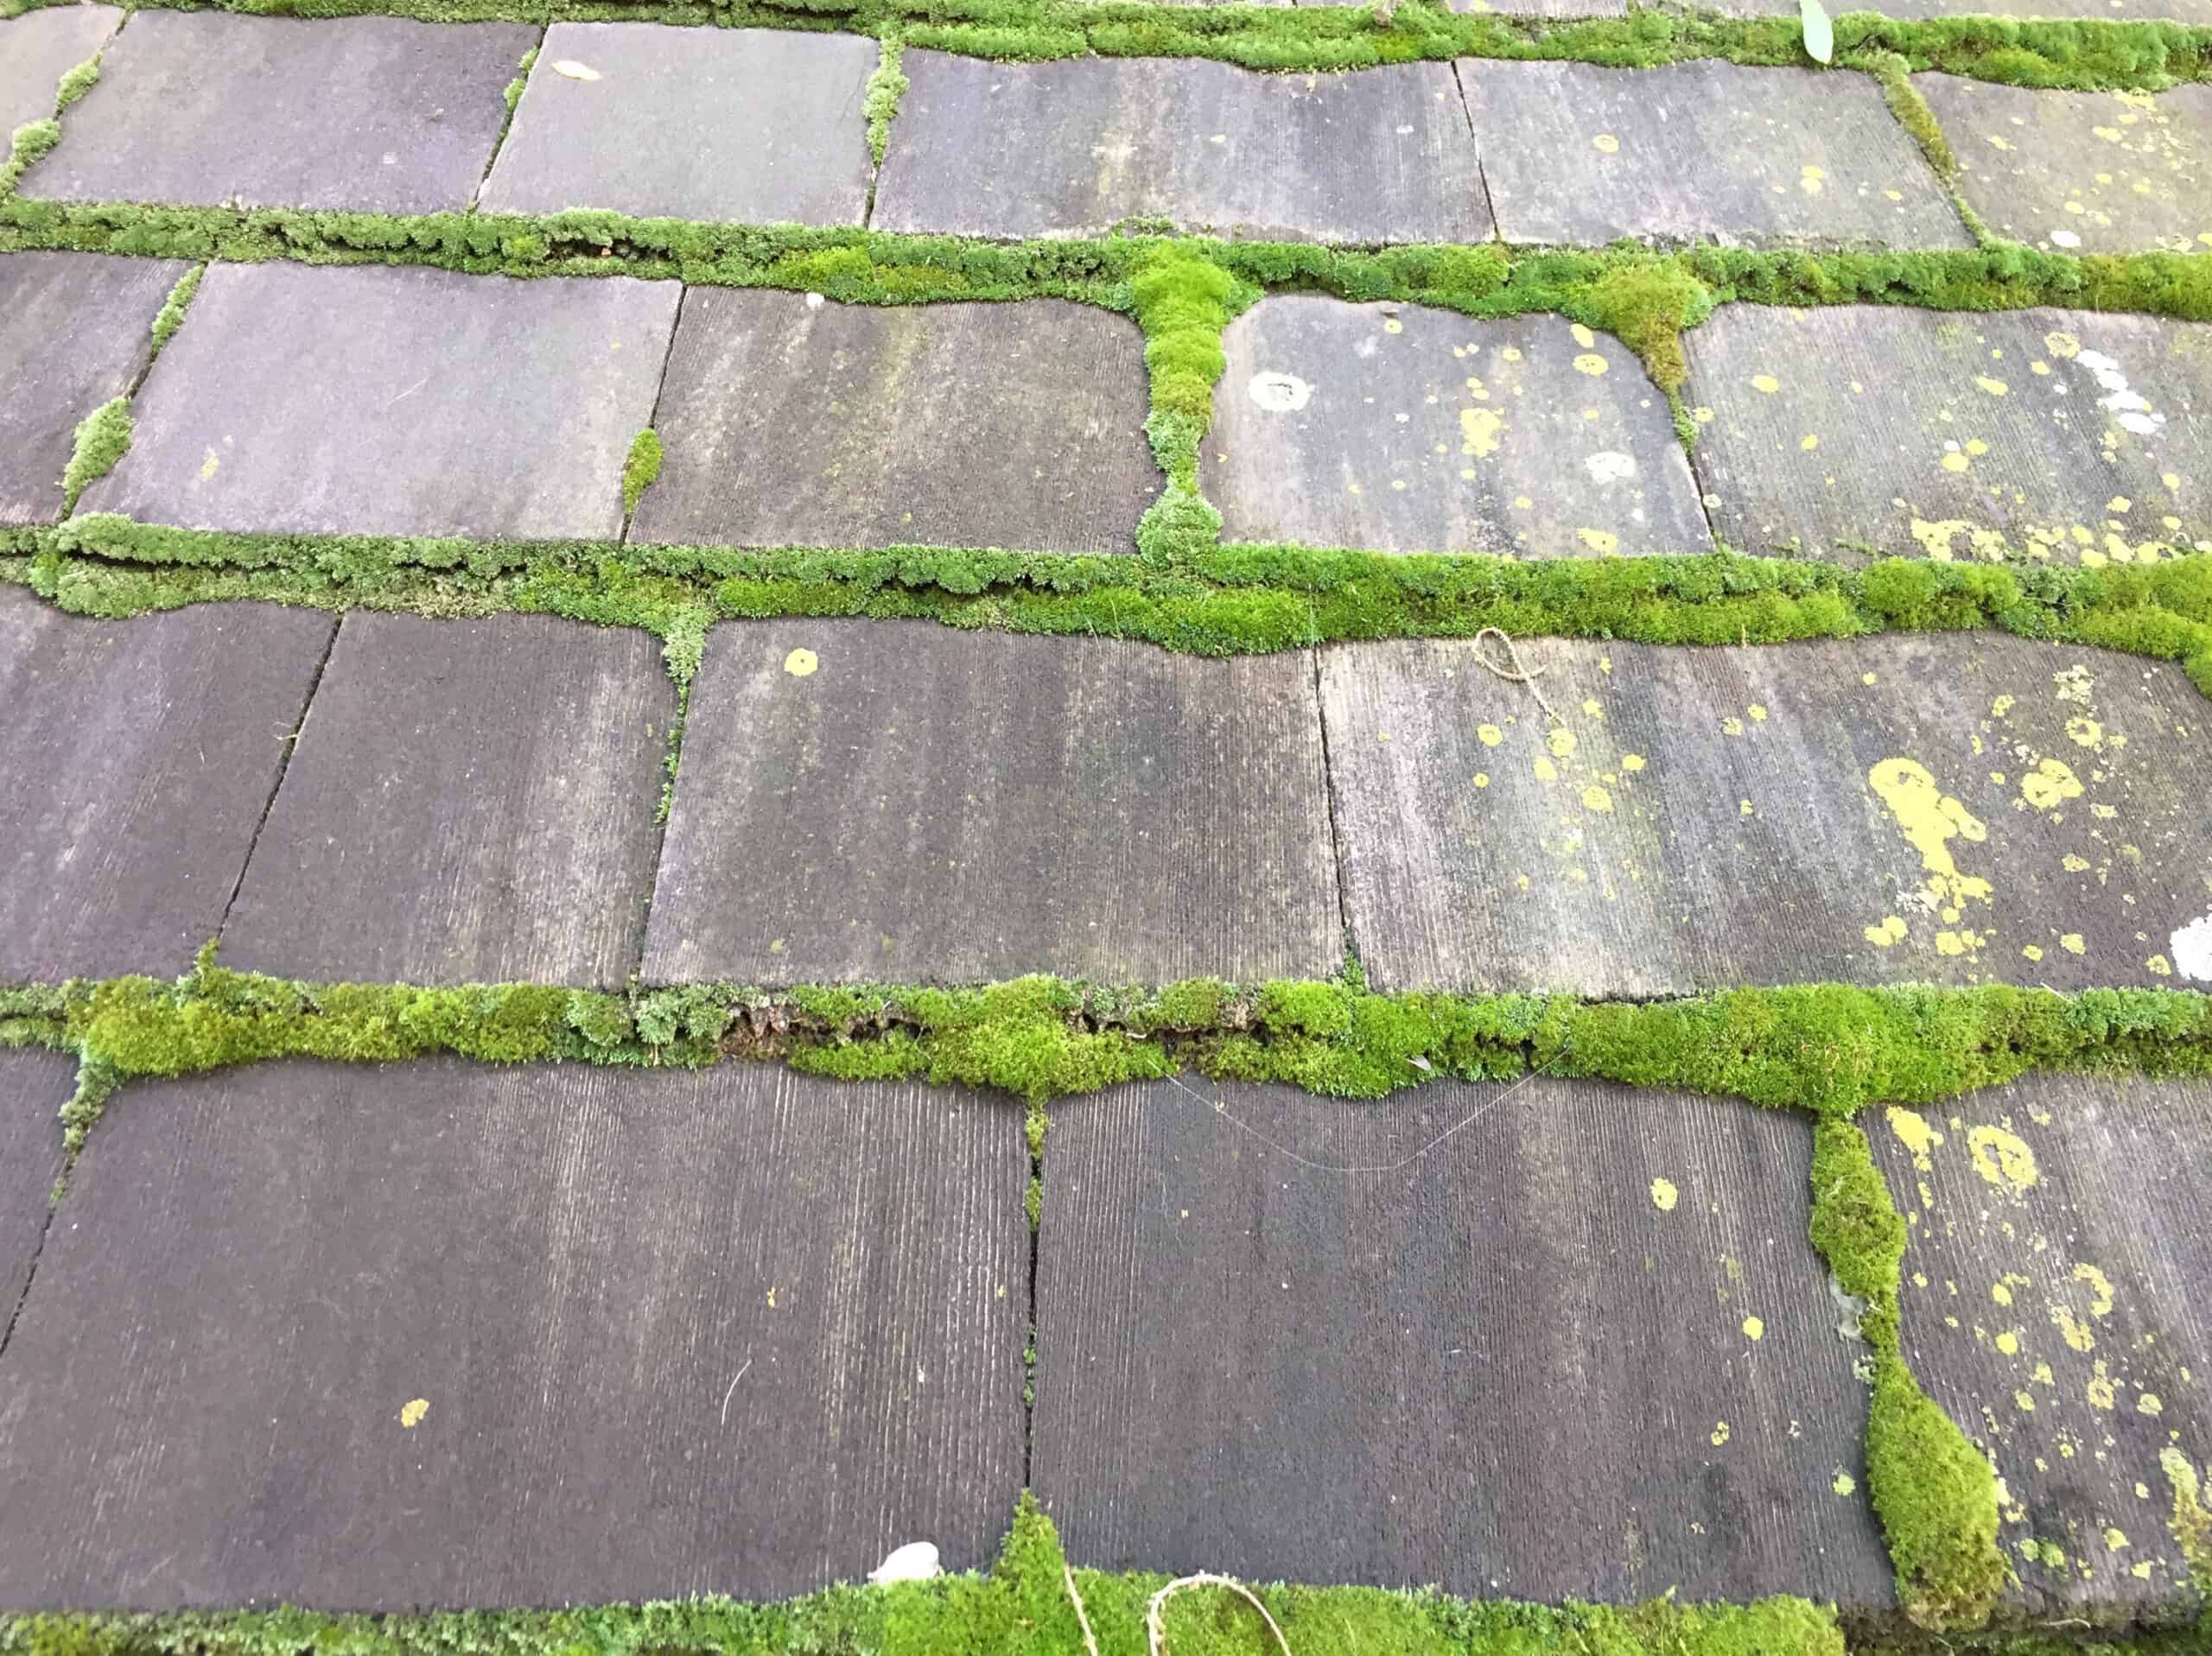 Wooden Tile Roof With,Green Moss Growing In Crevices